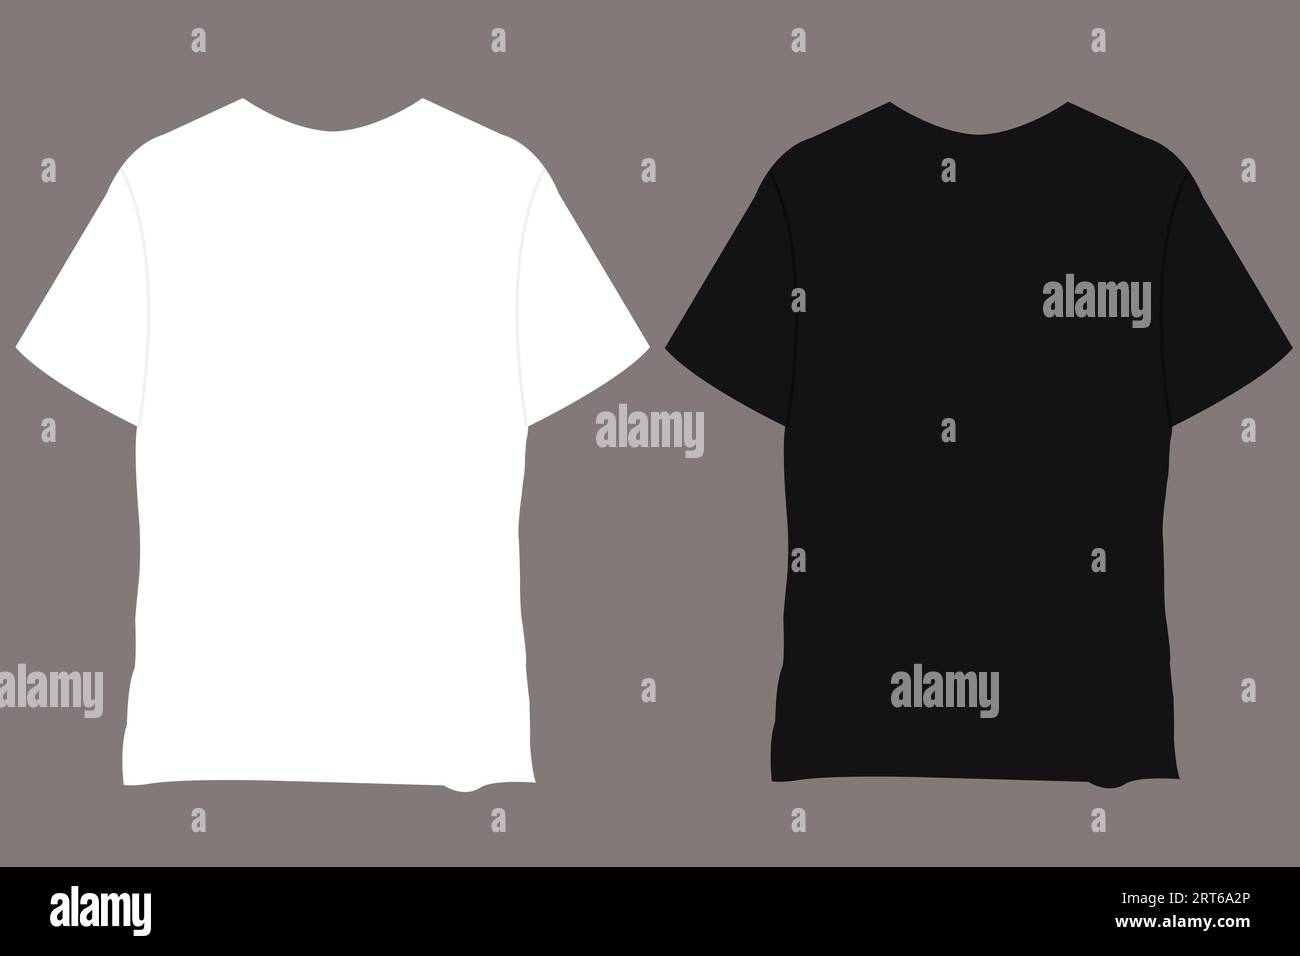 TShirt Mockup vector template. Blank Black and white T-Shirts Front view presentation for print. Men's white and black Mock-up Ready to replace design Stock Vector